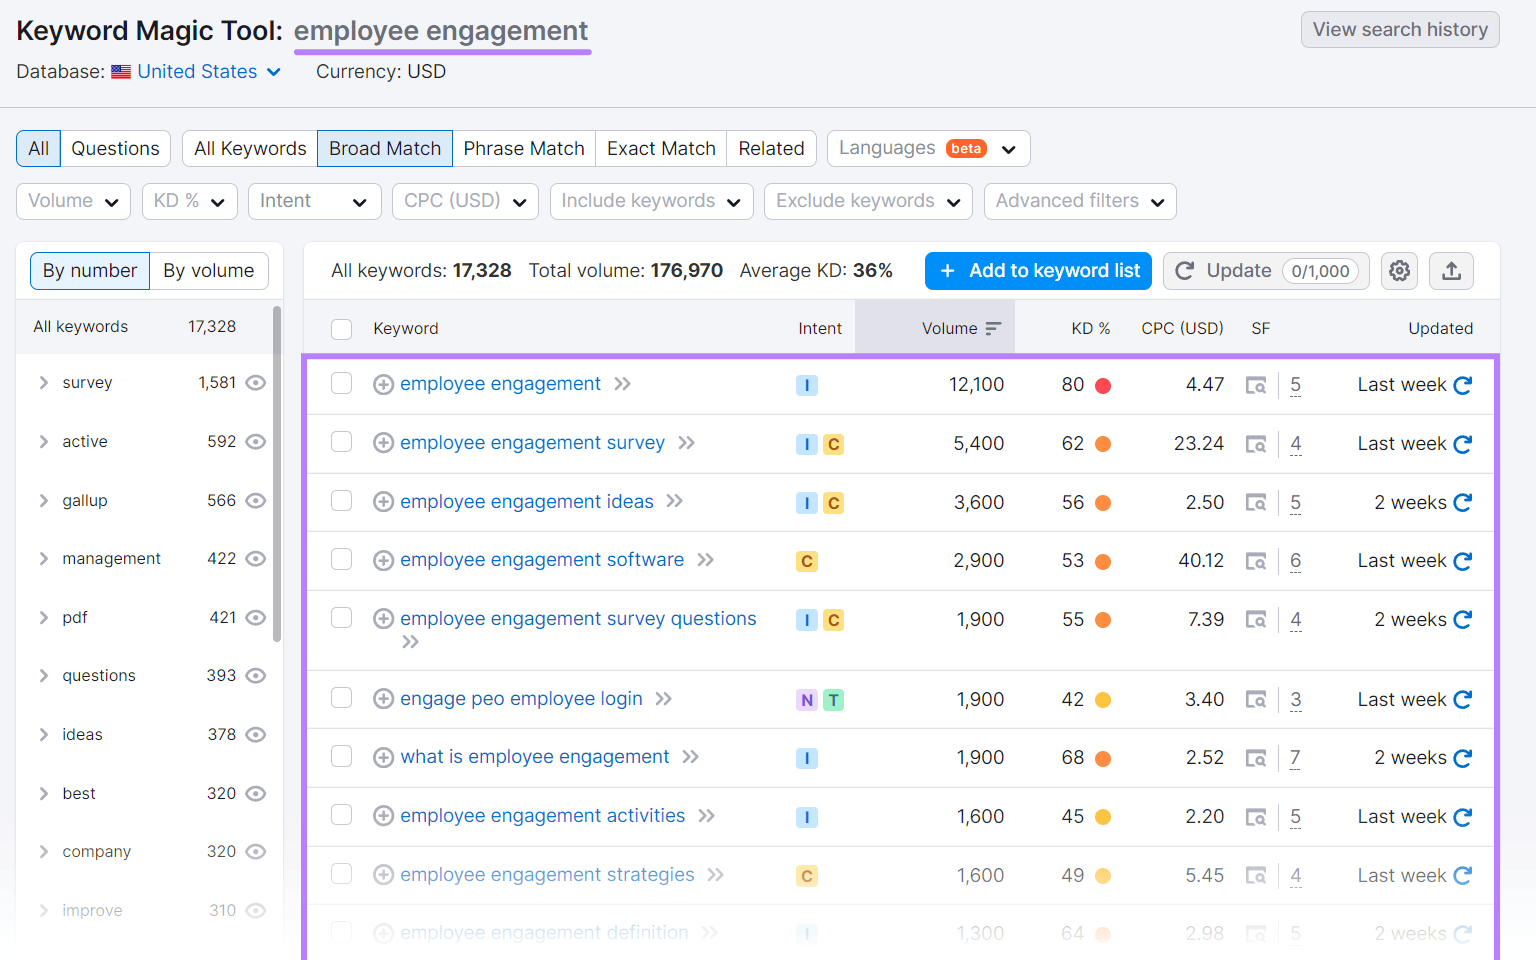 A list of related keywords to "employee engagement" in Keyword Magic Tool